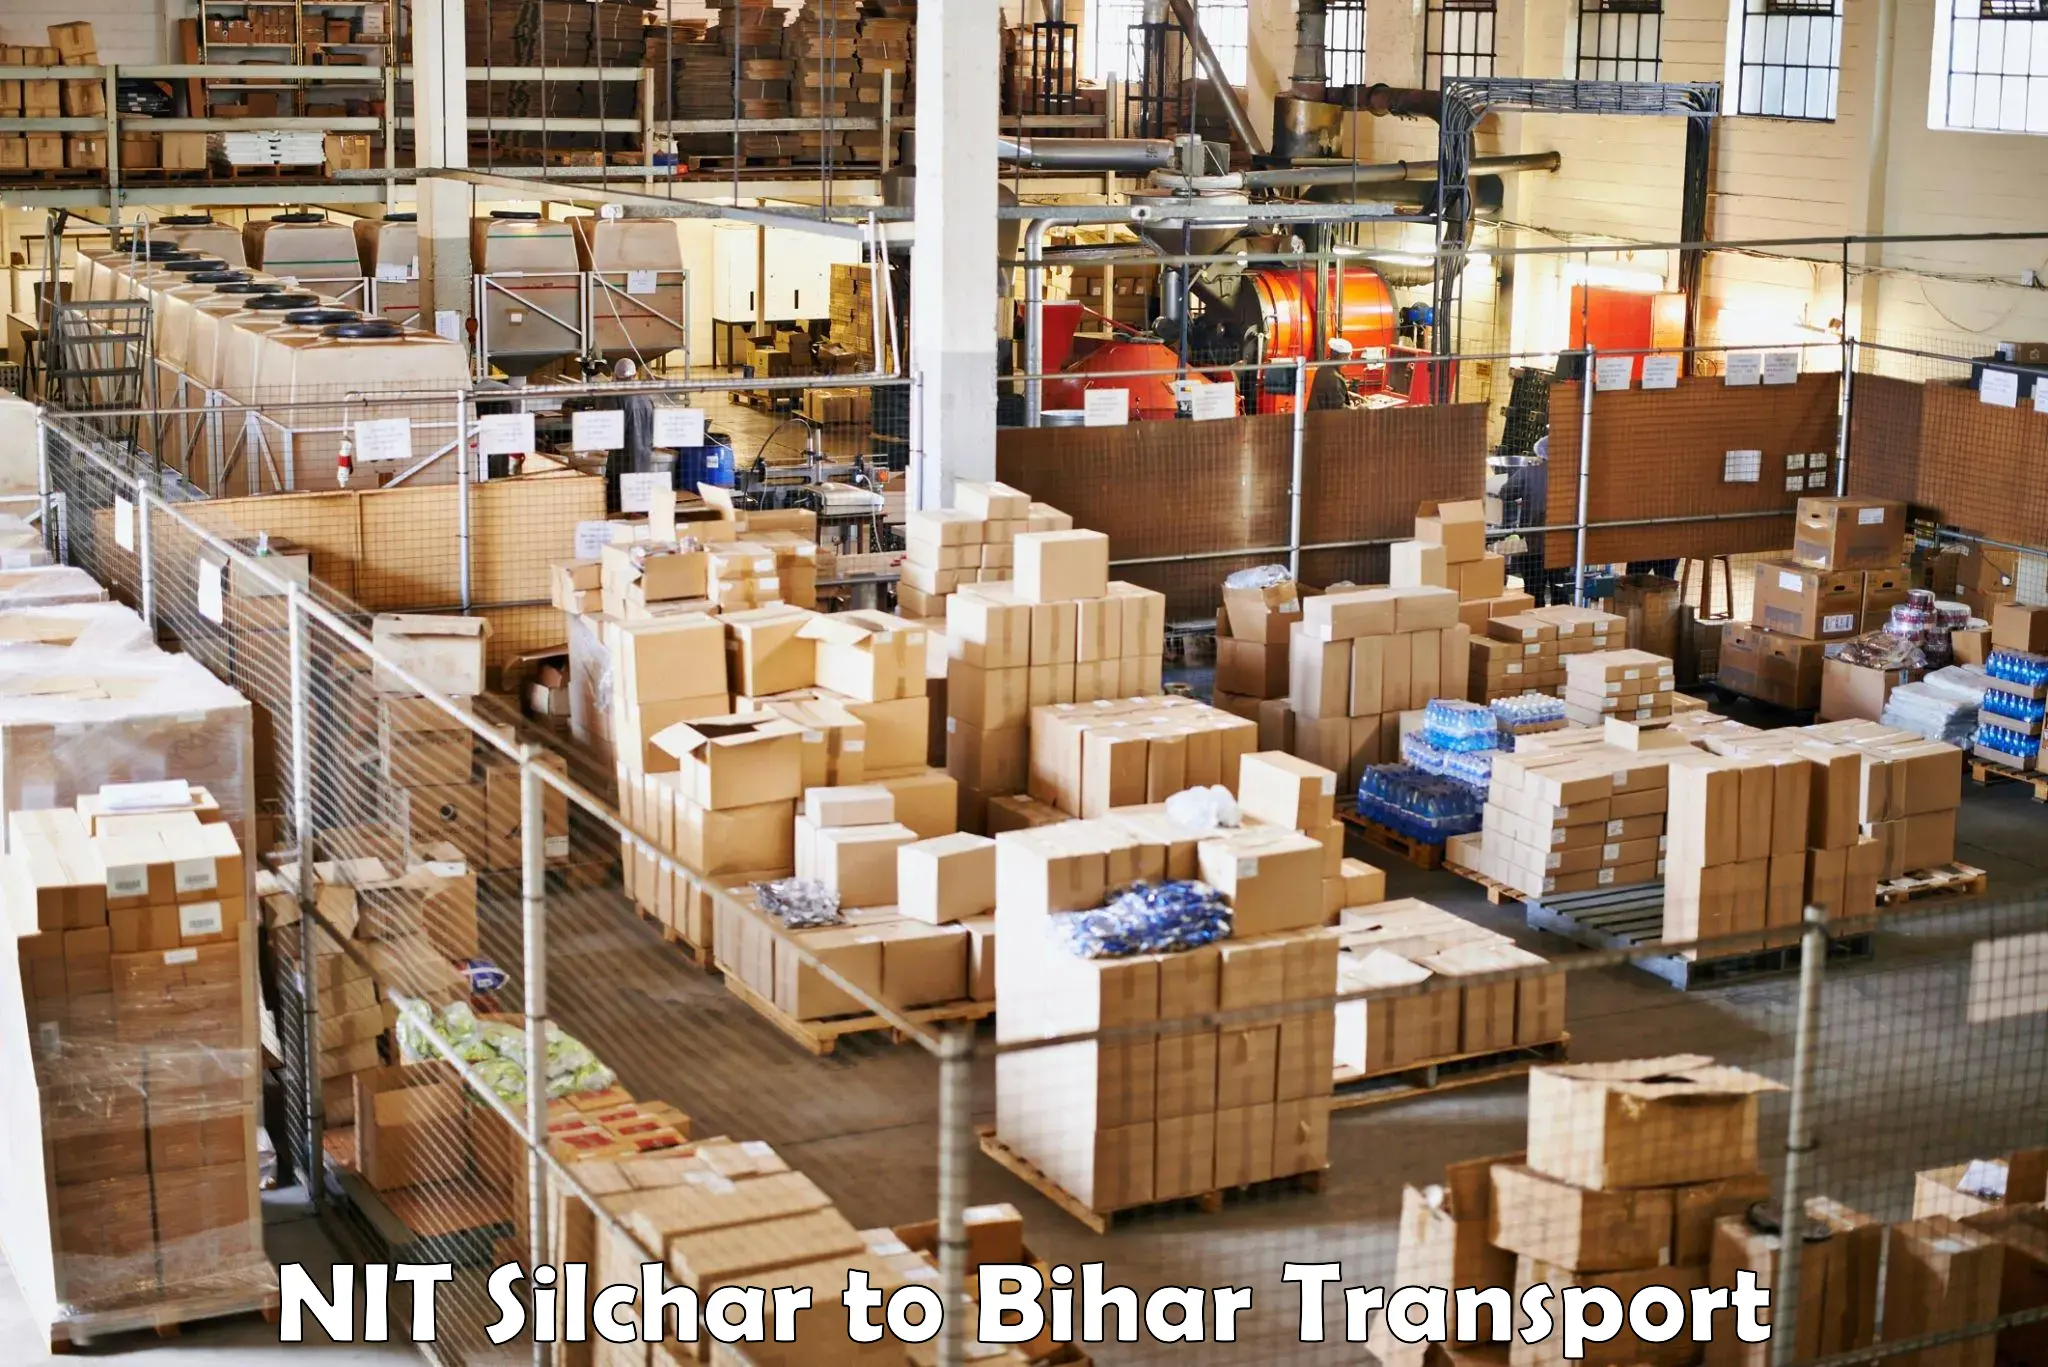 Road transport services in NIT Silchar to Sheohar